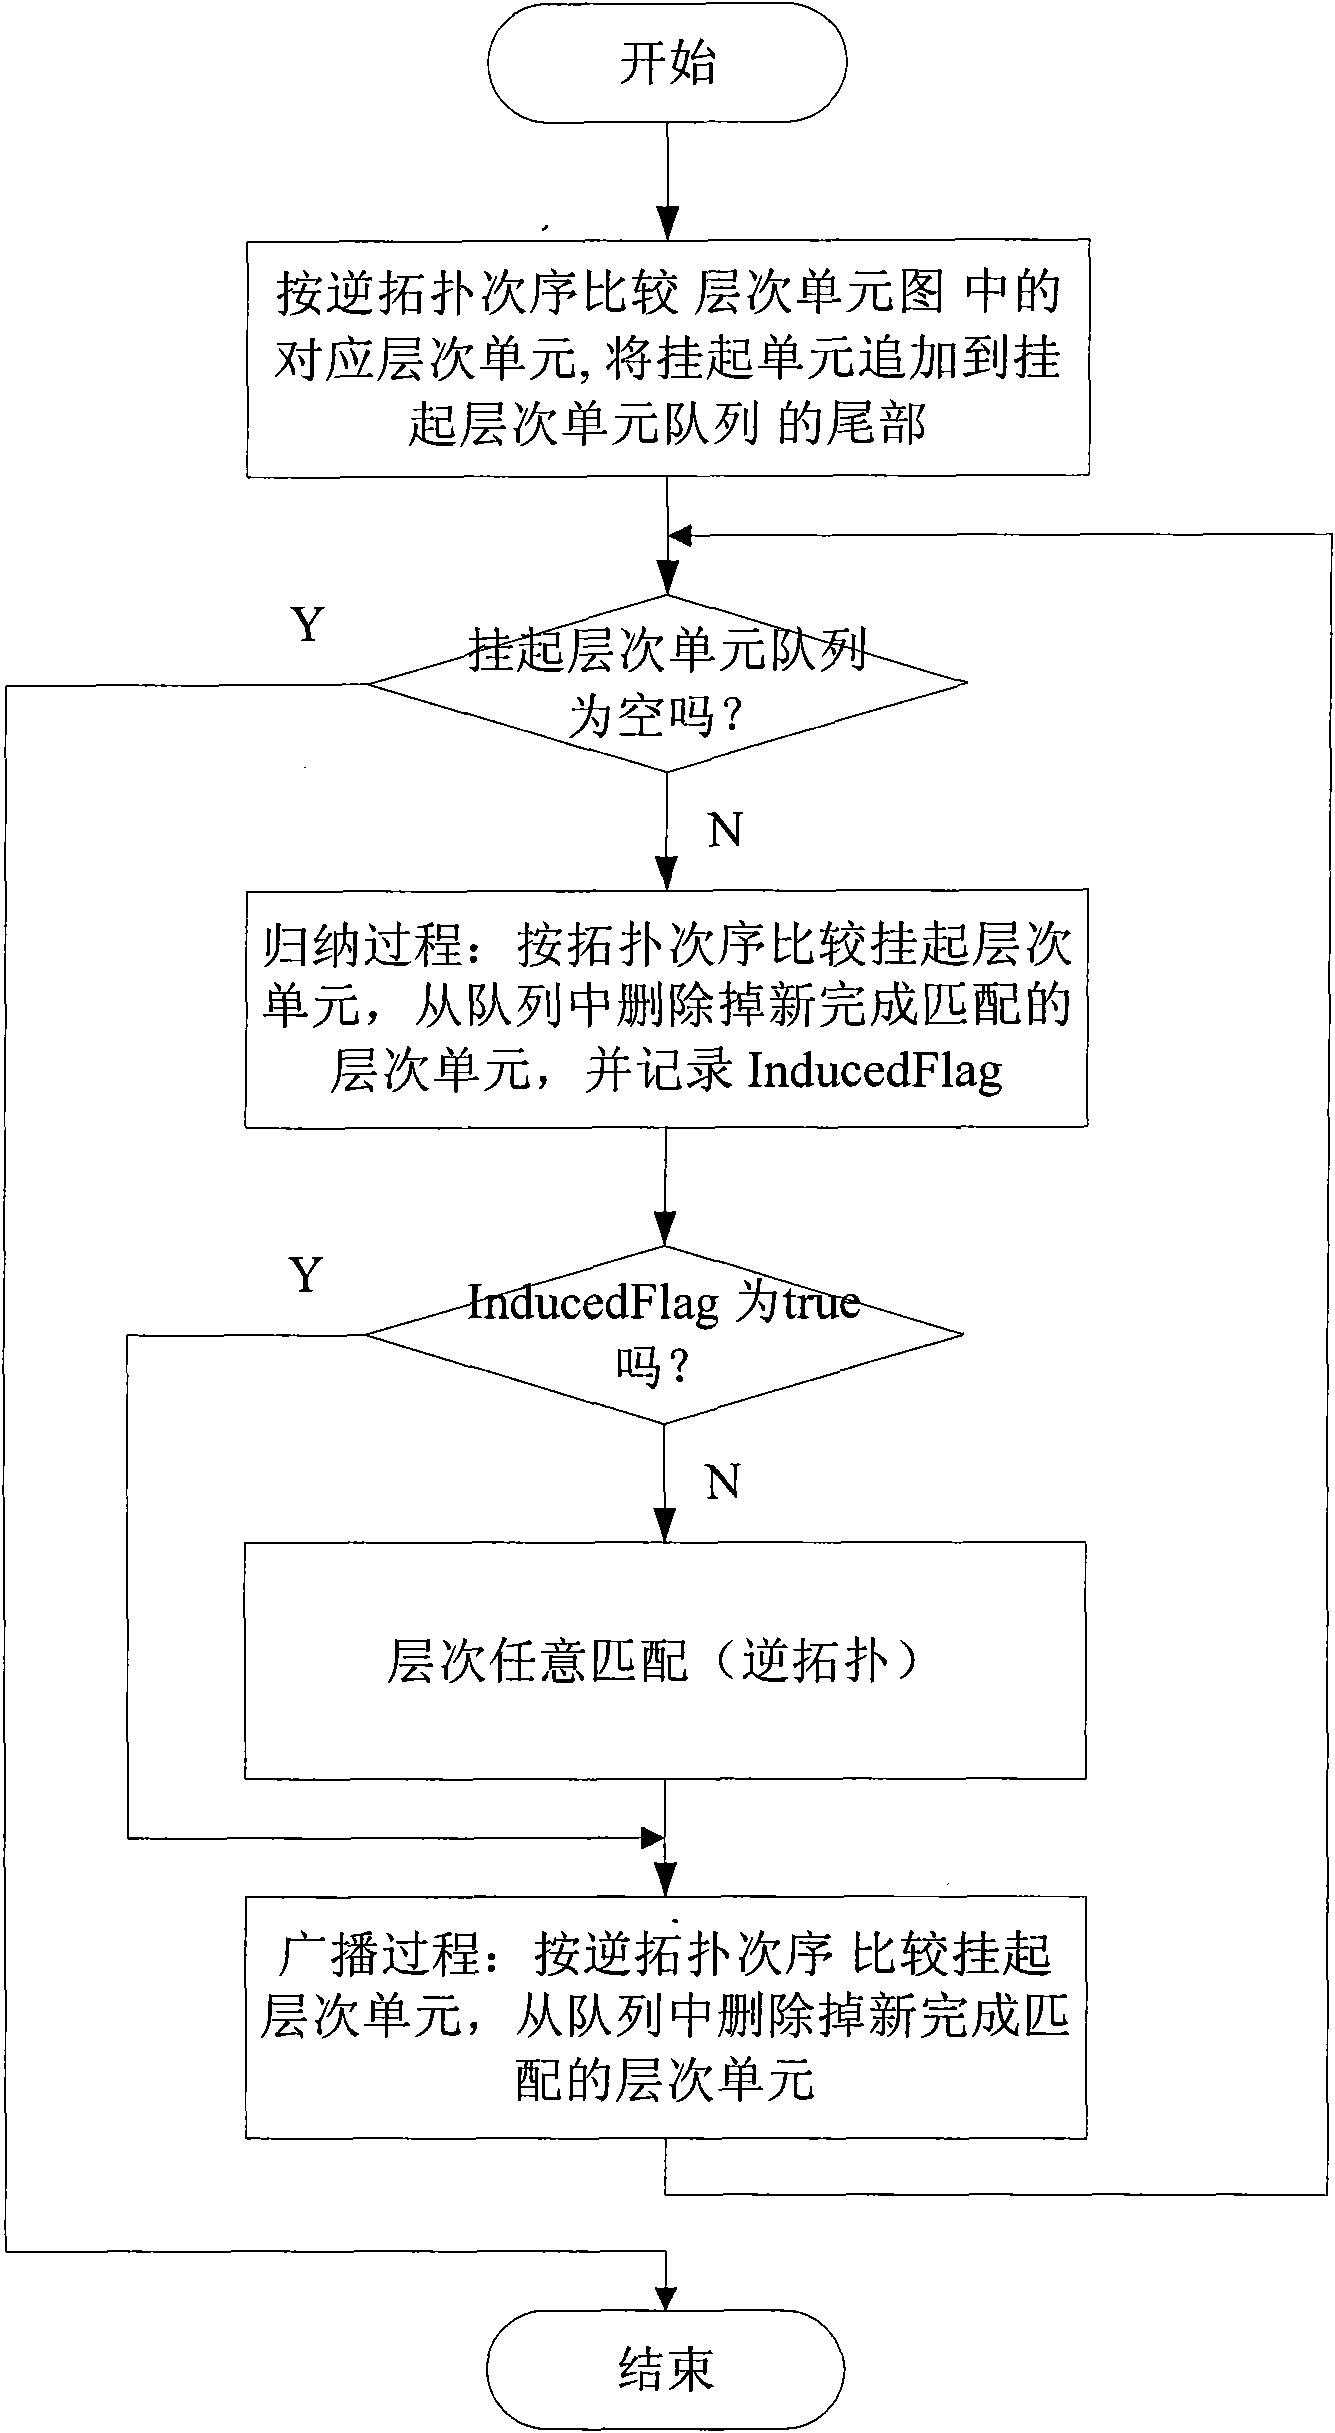 Method for comparing hierarchical net list of integrated circuit